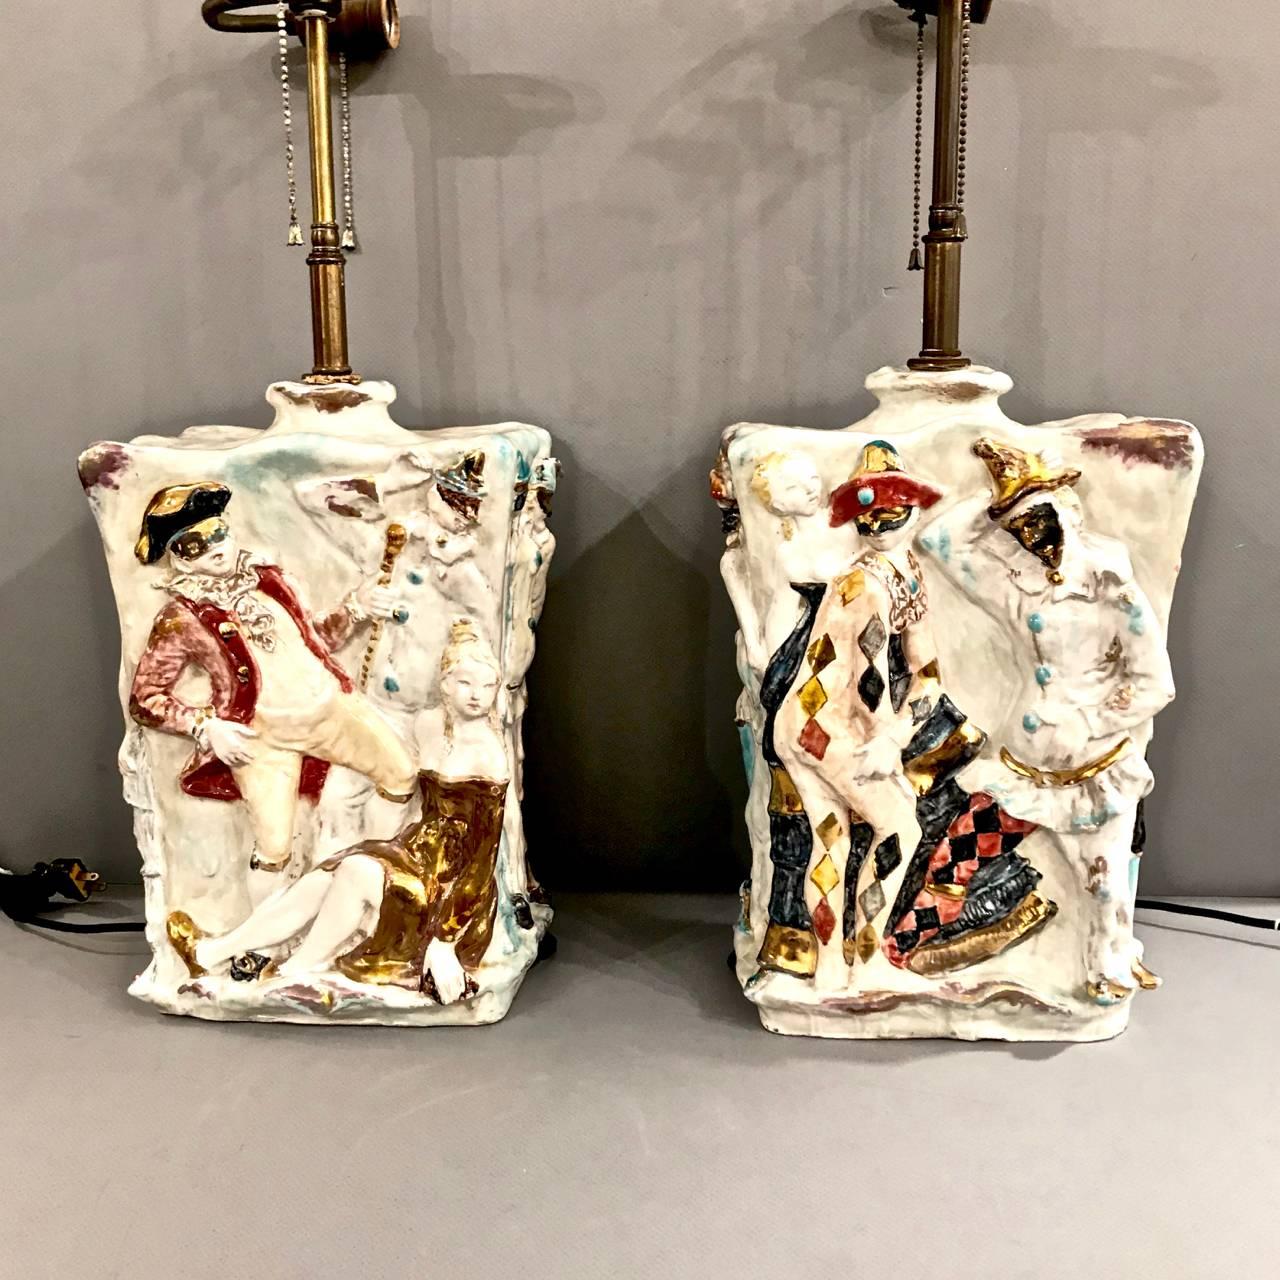 This is a superb set of midcentury Italian ceramic lamps by the renown Prof. Eugenio Pattarino that date to the mid-20th century. The lamps feature high relief Carnival Reveller figures in festive glazed colors.
Eugenia Pattarino (1885-1971) was a